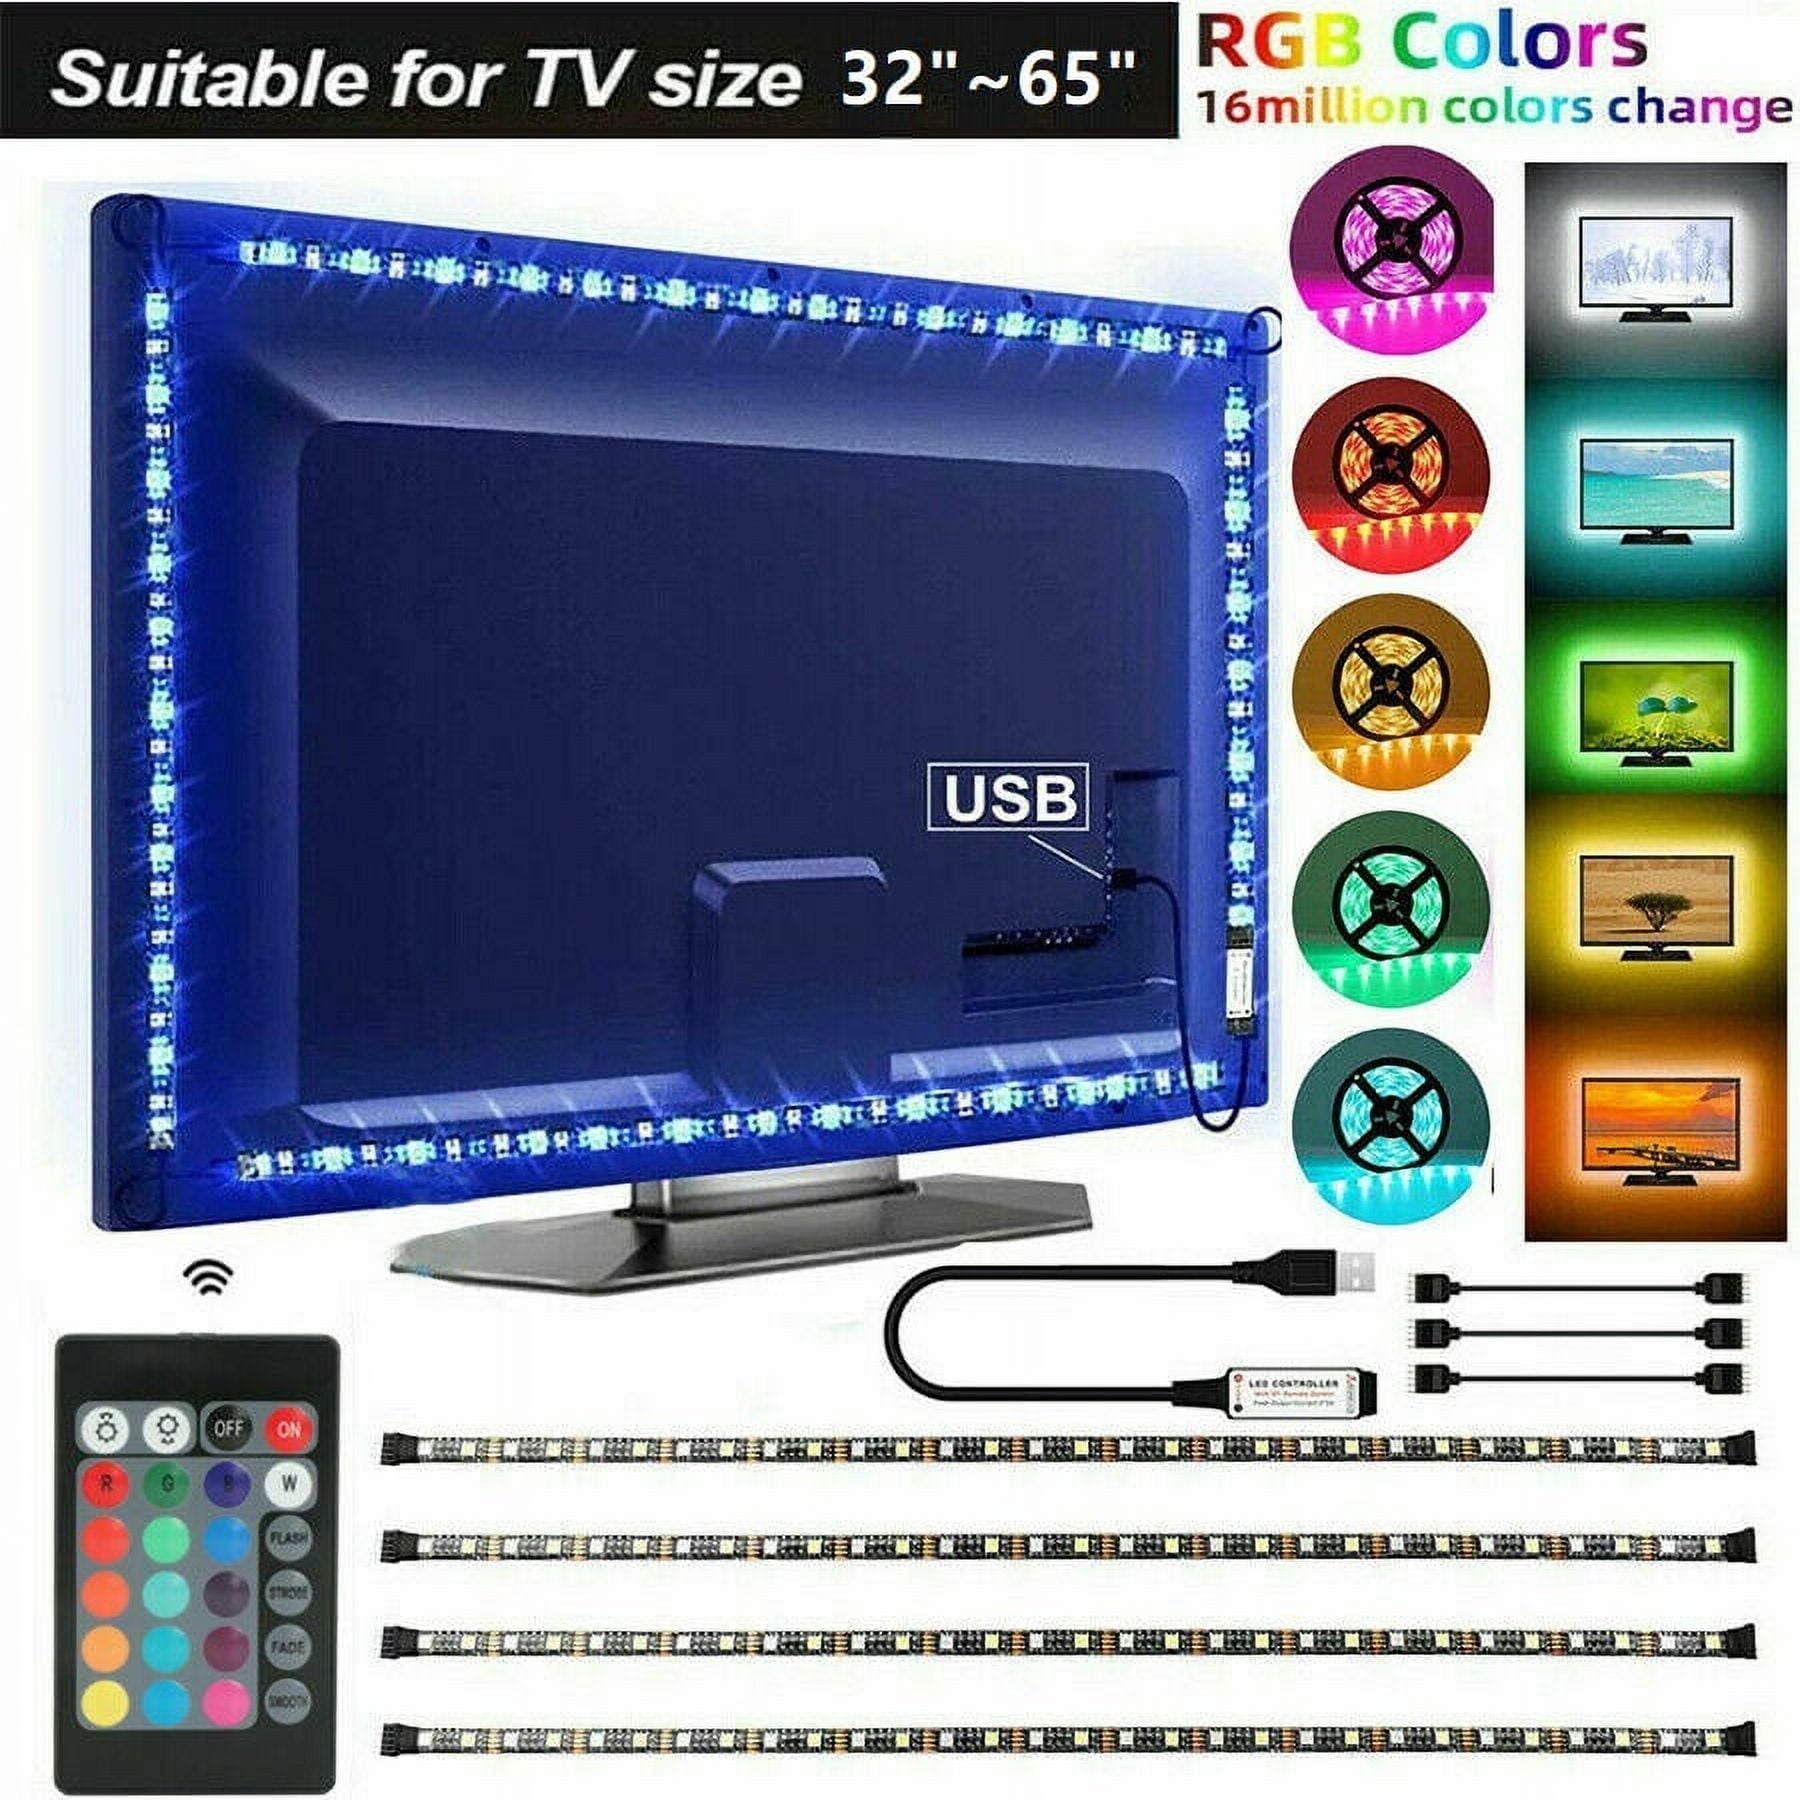  USB LED Lighting Strip for HDTV - Small (39in / 1m) -  Multi-Color RGB - USB LED Backlight Strip with Dimmer for Flat Screen TV  LCD, Desktop Monitors, Kitchen Cabinets… 